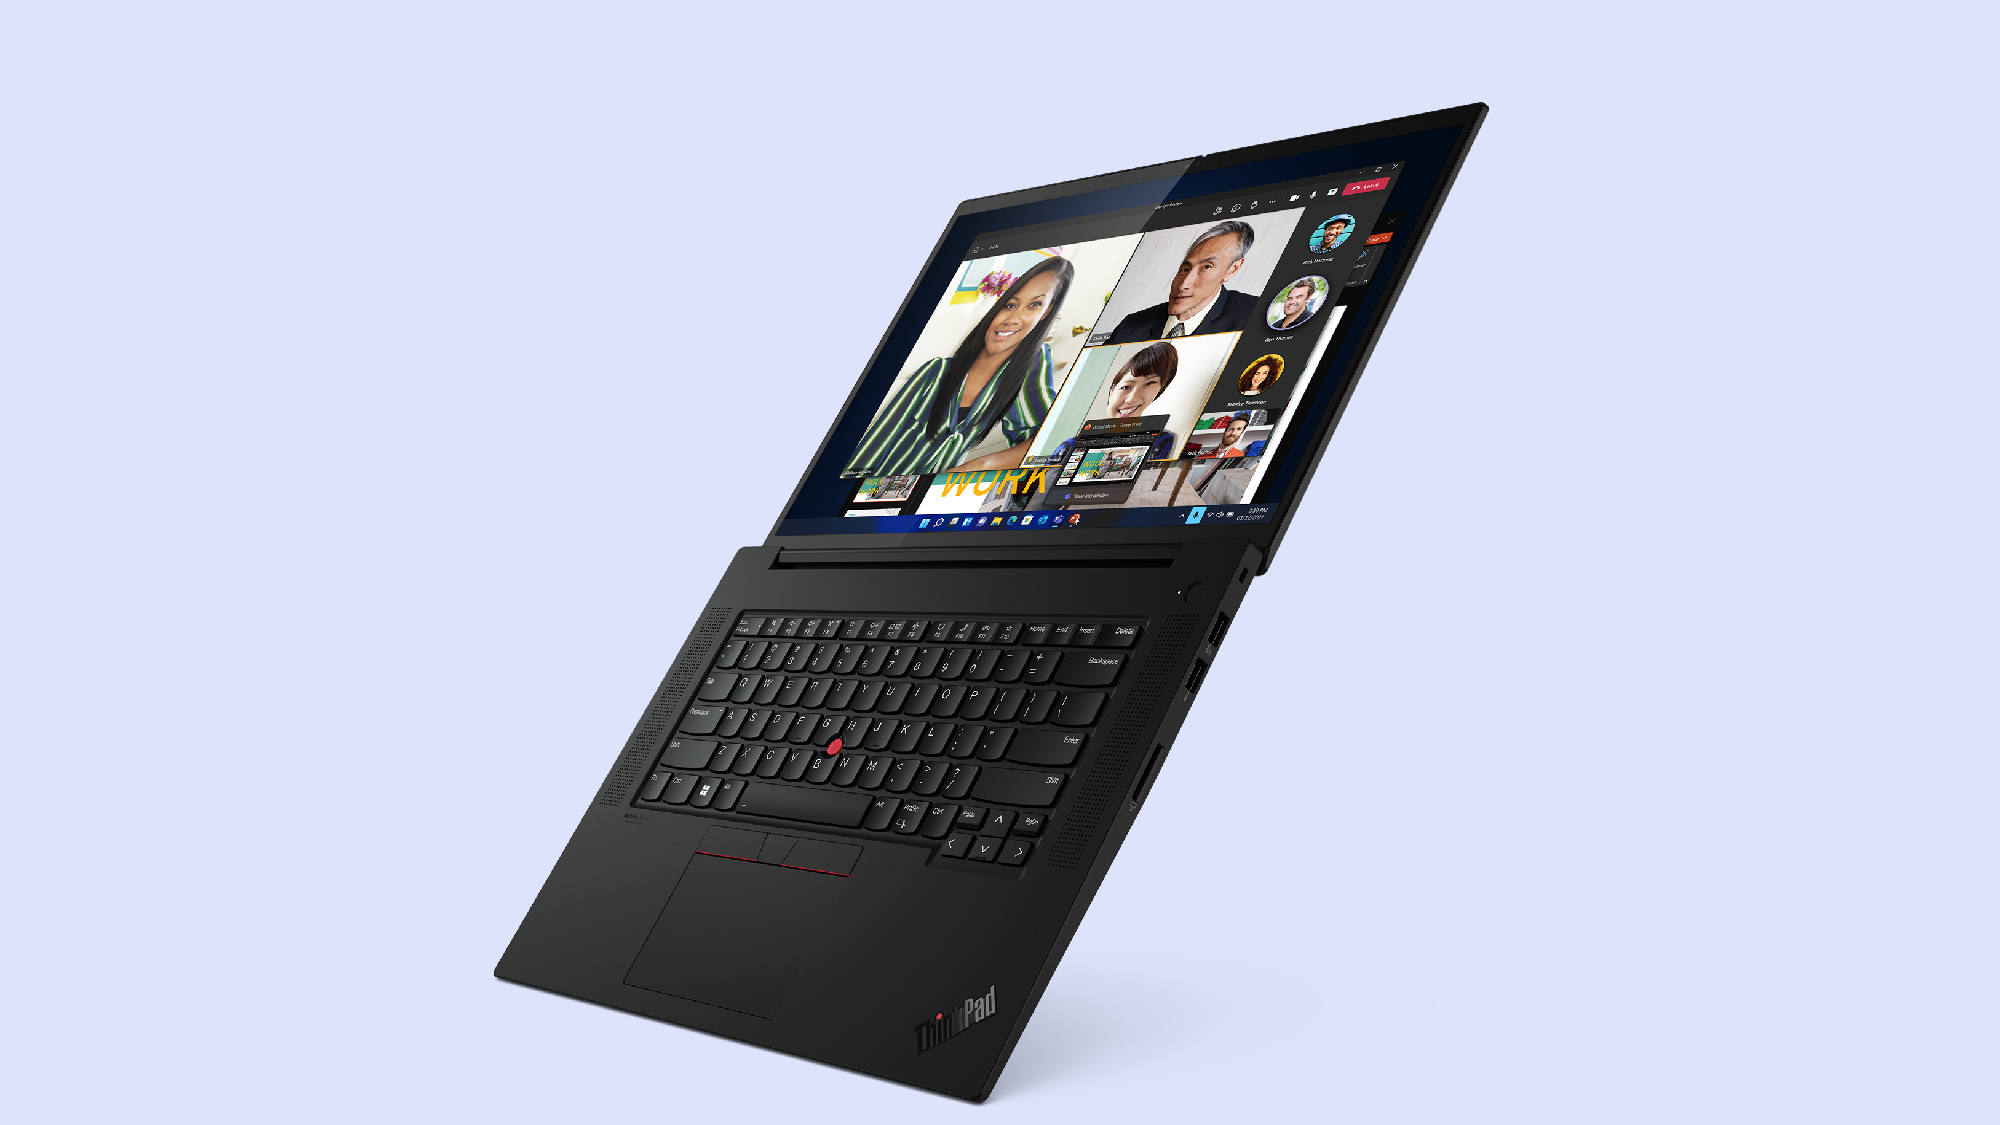 DELA DISCOUNT sYDdfkVxaeFMs3Li9QPTNk Lenovo announces new ThinkPads at MWC Barcelona 2022 — one is the world's first Snapdragon 8cx Gen 3 laptop DELA DISCOUNT  